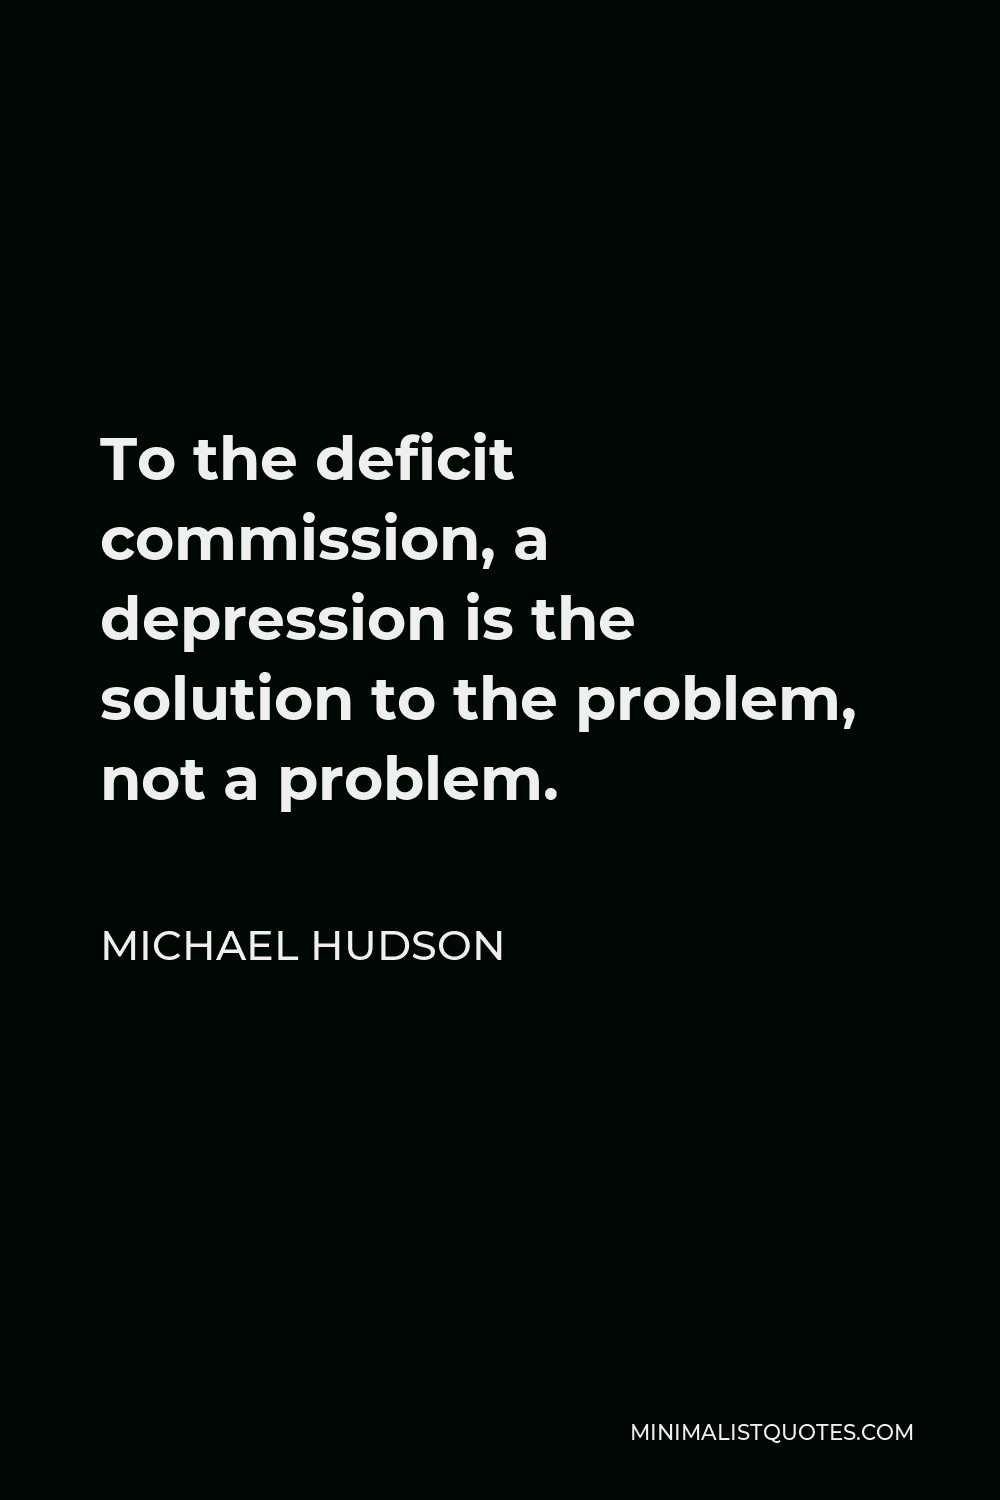 Michael Hudson Quote - To the deficit commission, a depression is the solution to the problem, not a problem.